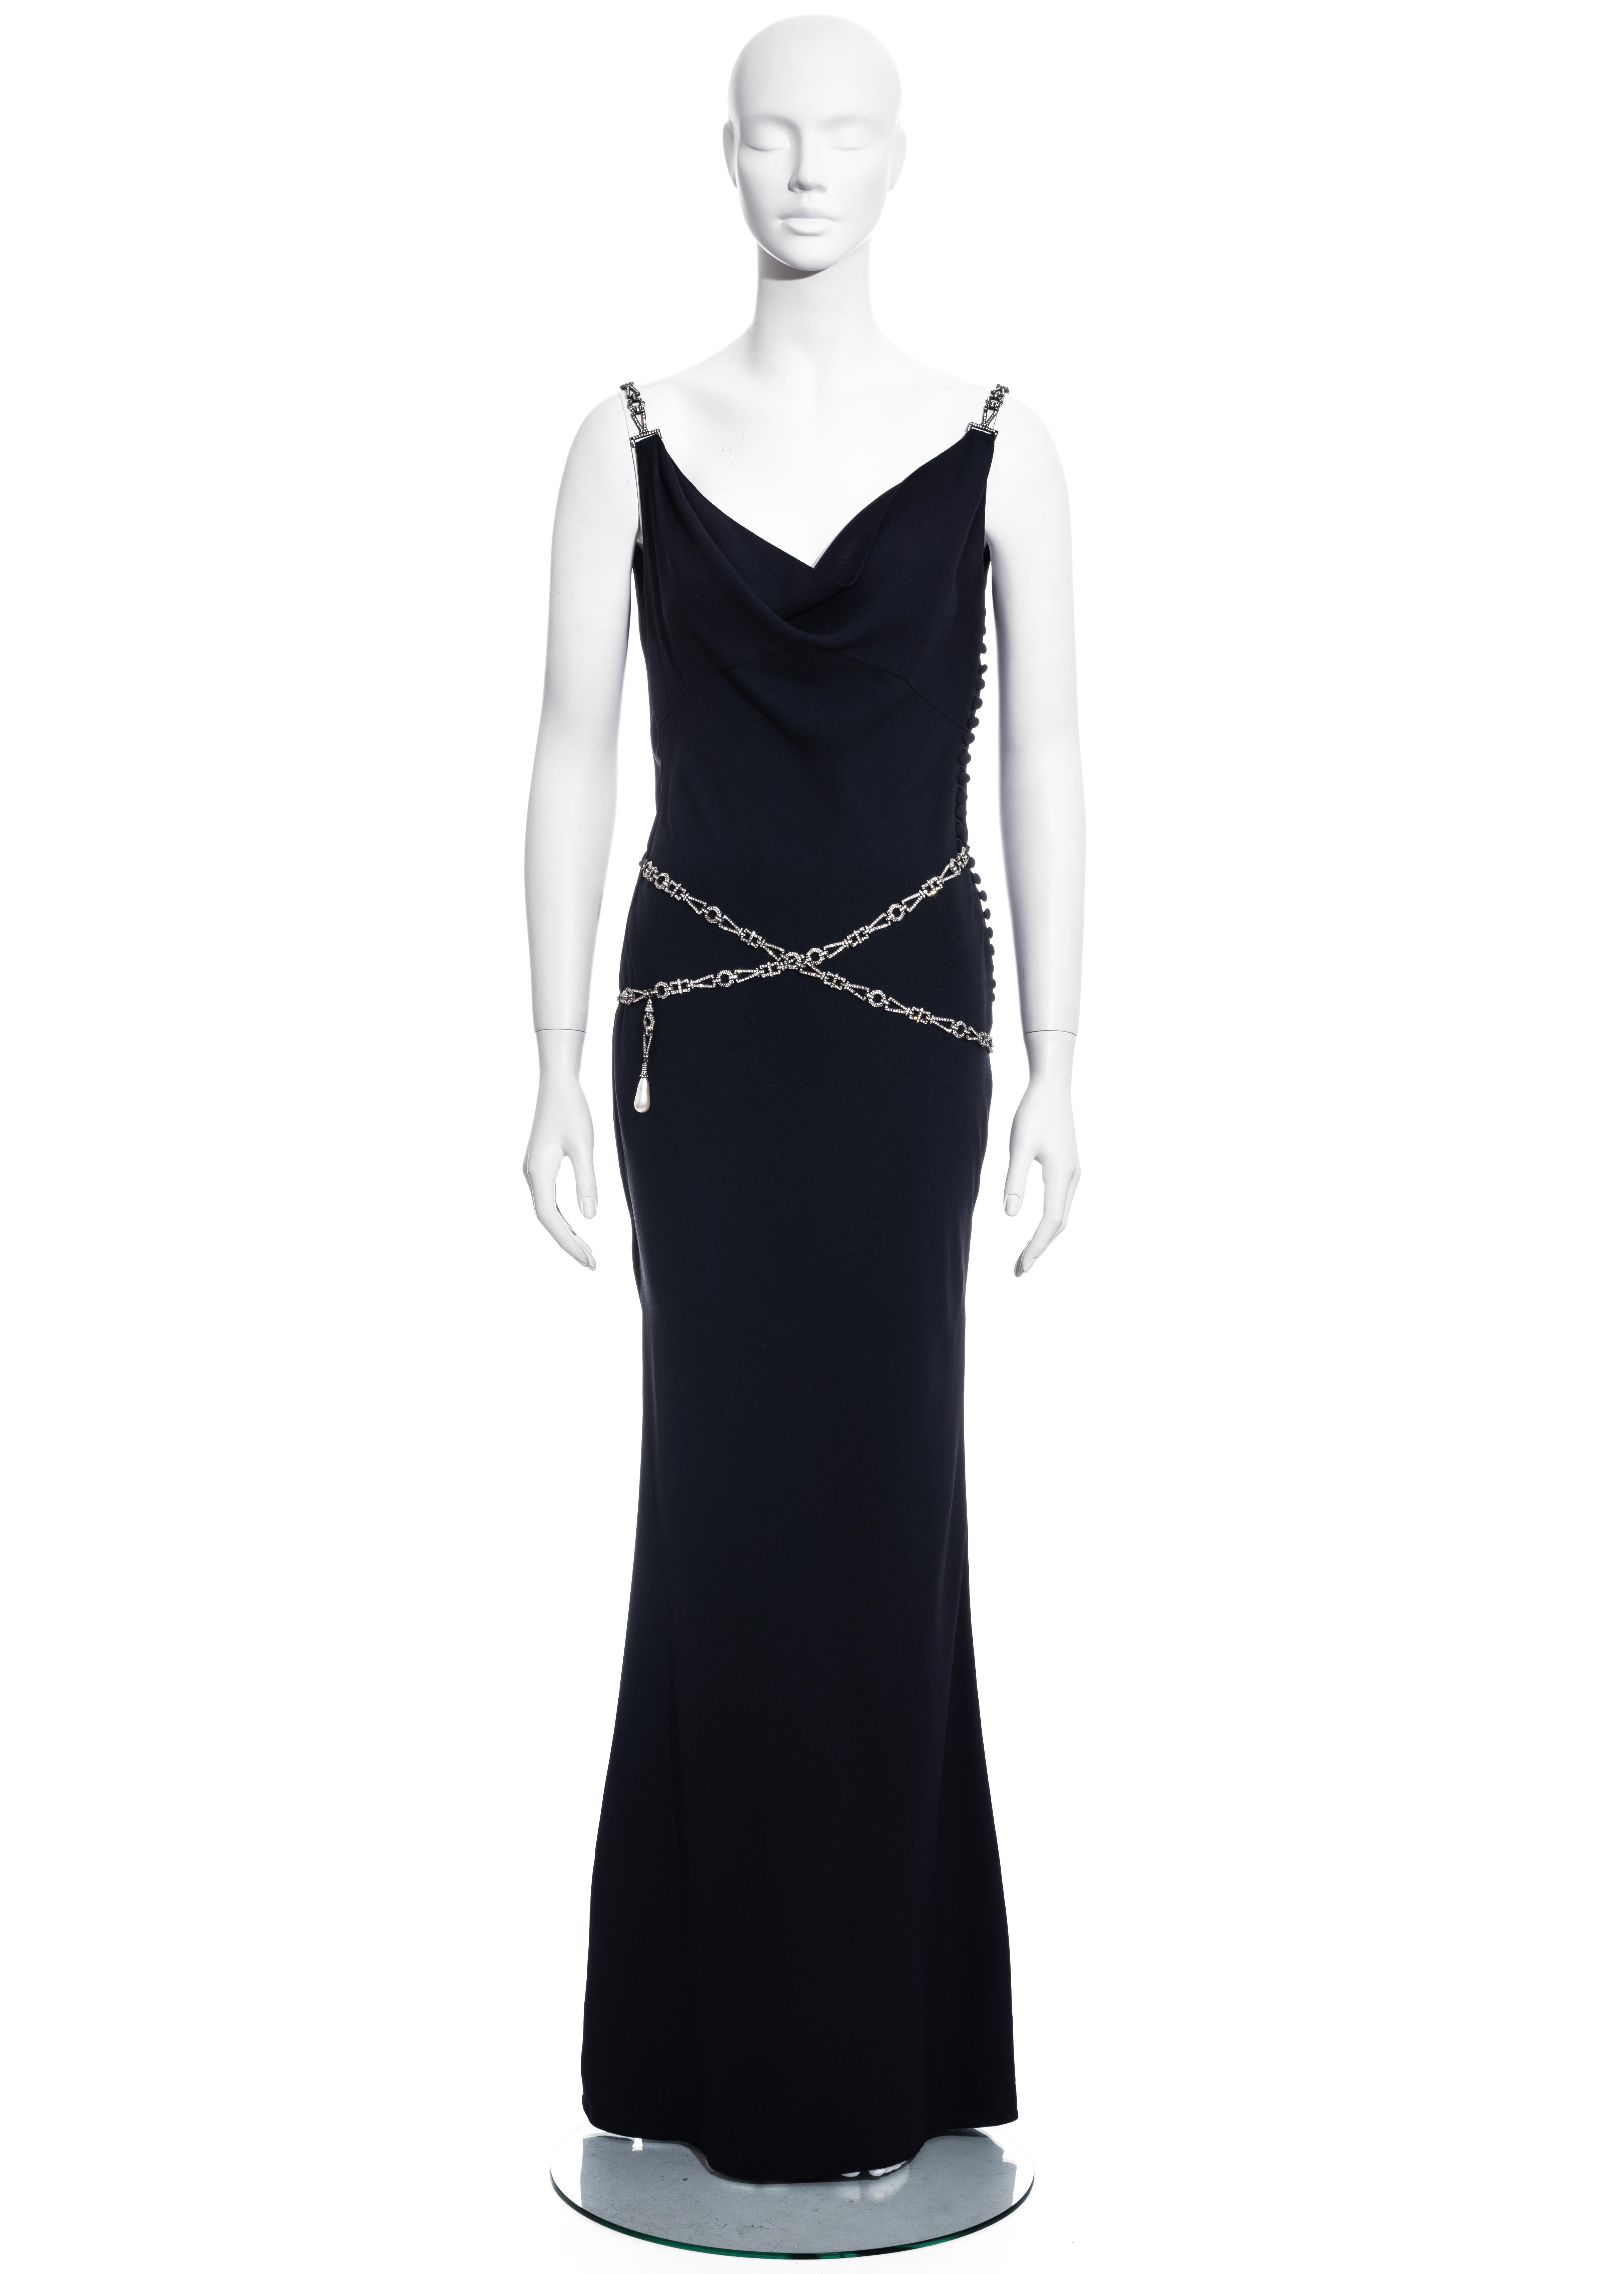 ▪ Christian Dior midnight blue evening dress
▪ Designed by John Galliano
▪ 68% Acetate, 32% Viscose 
▪ Cowl neckline
▪ Low back
▪ Fabric covered button fastenings 
▪ Chained shoulder straps belt with crystals and pearl
▪ FR 42 - UK 14 - US 10 
▪